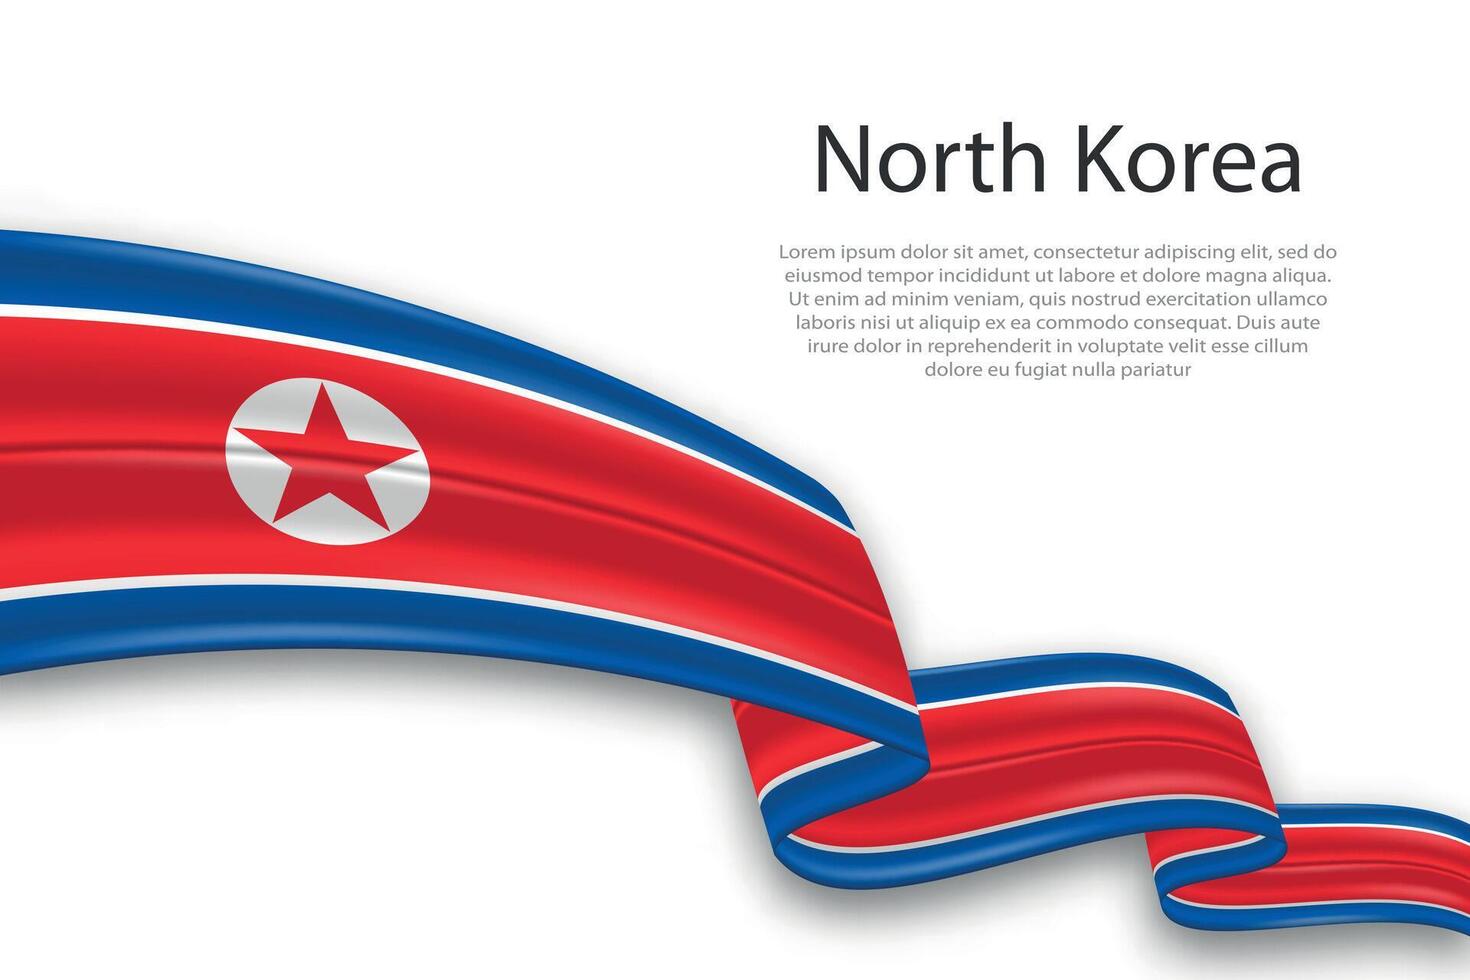 Abstract Wavy Flag of North Korea on White Background vector